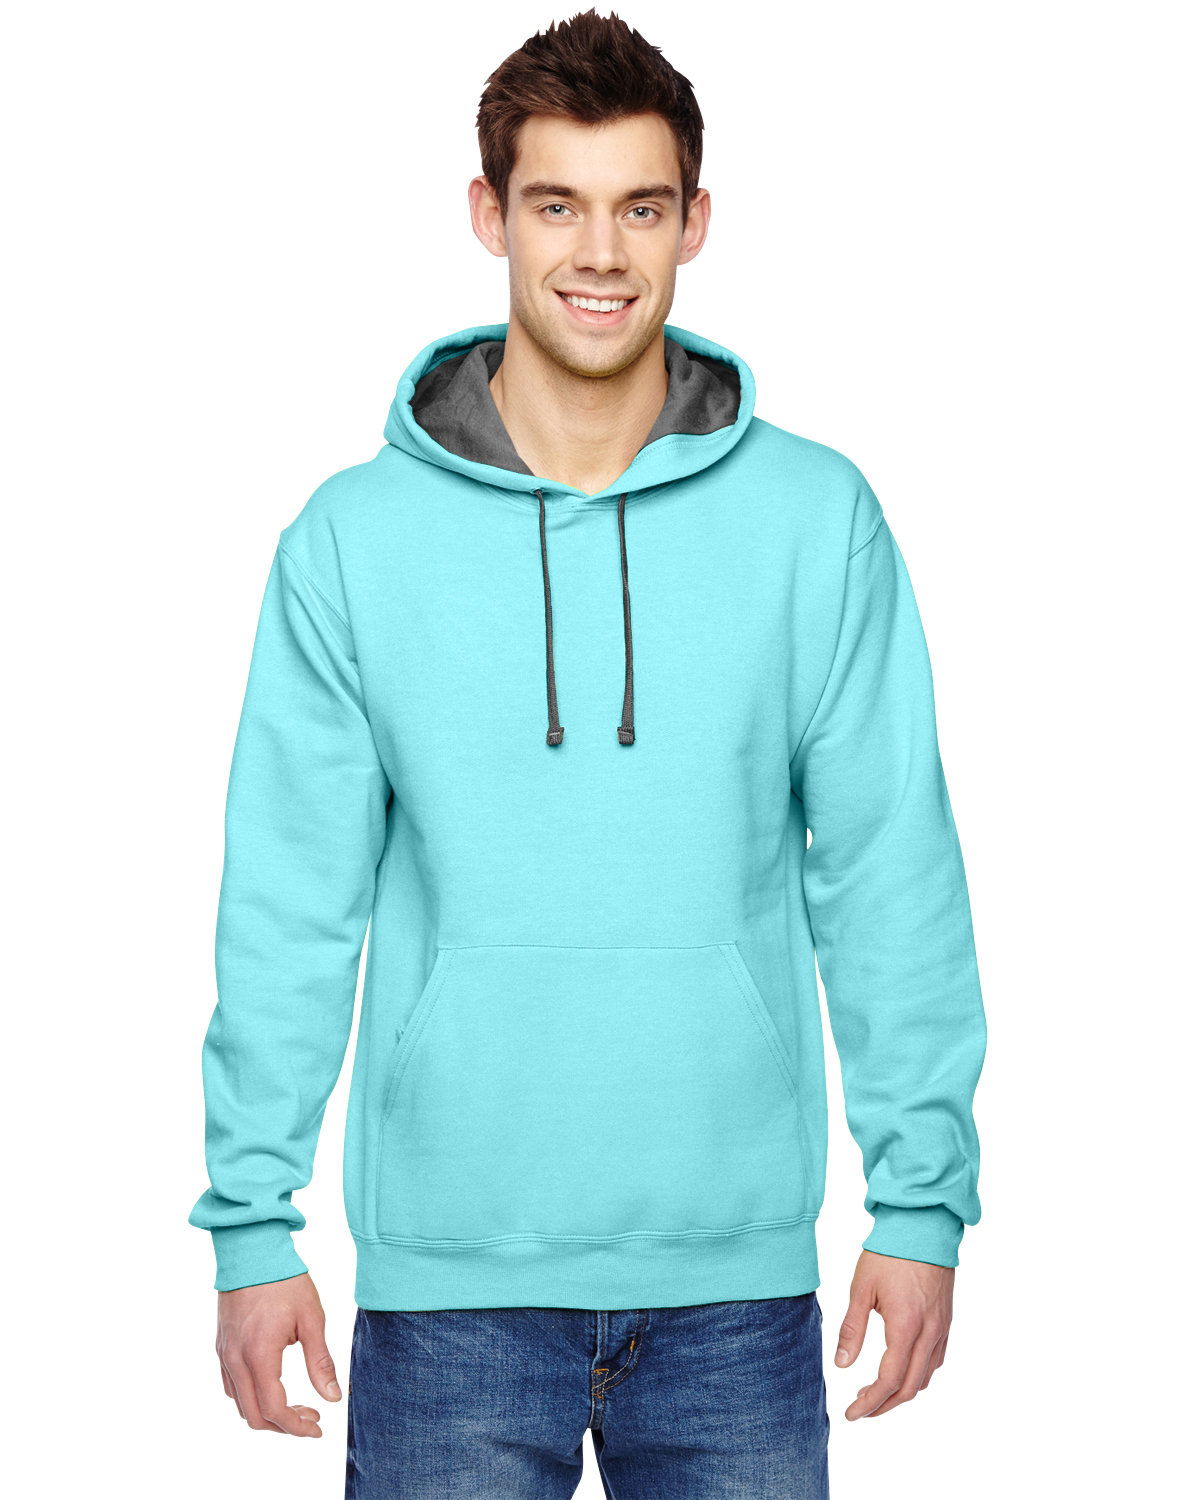 Picture of Fruit of the Loom Sofspun® Hooded Sweatshirt